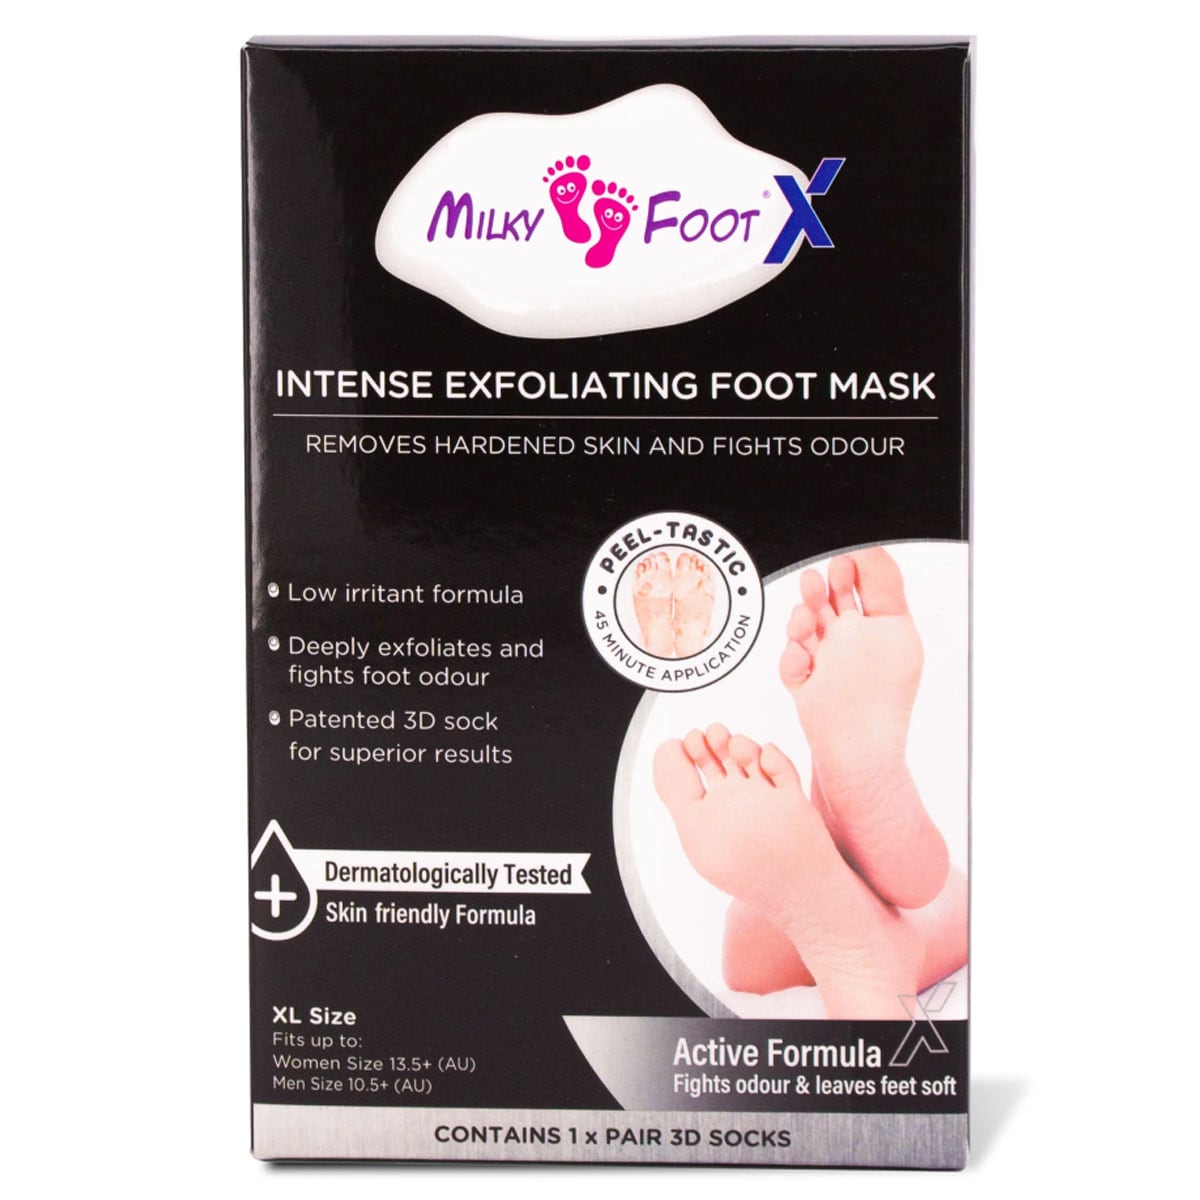 Milky Foot Active Intense Exfoliating Foot Mask XL